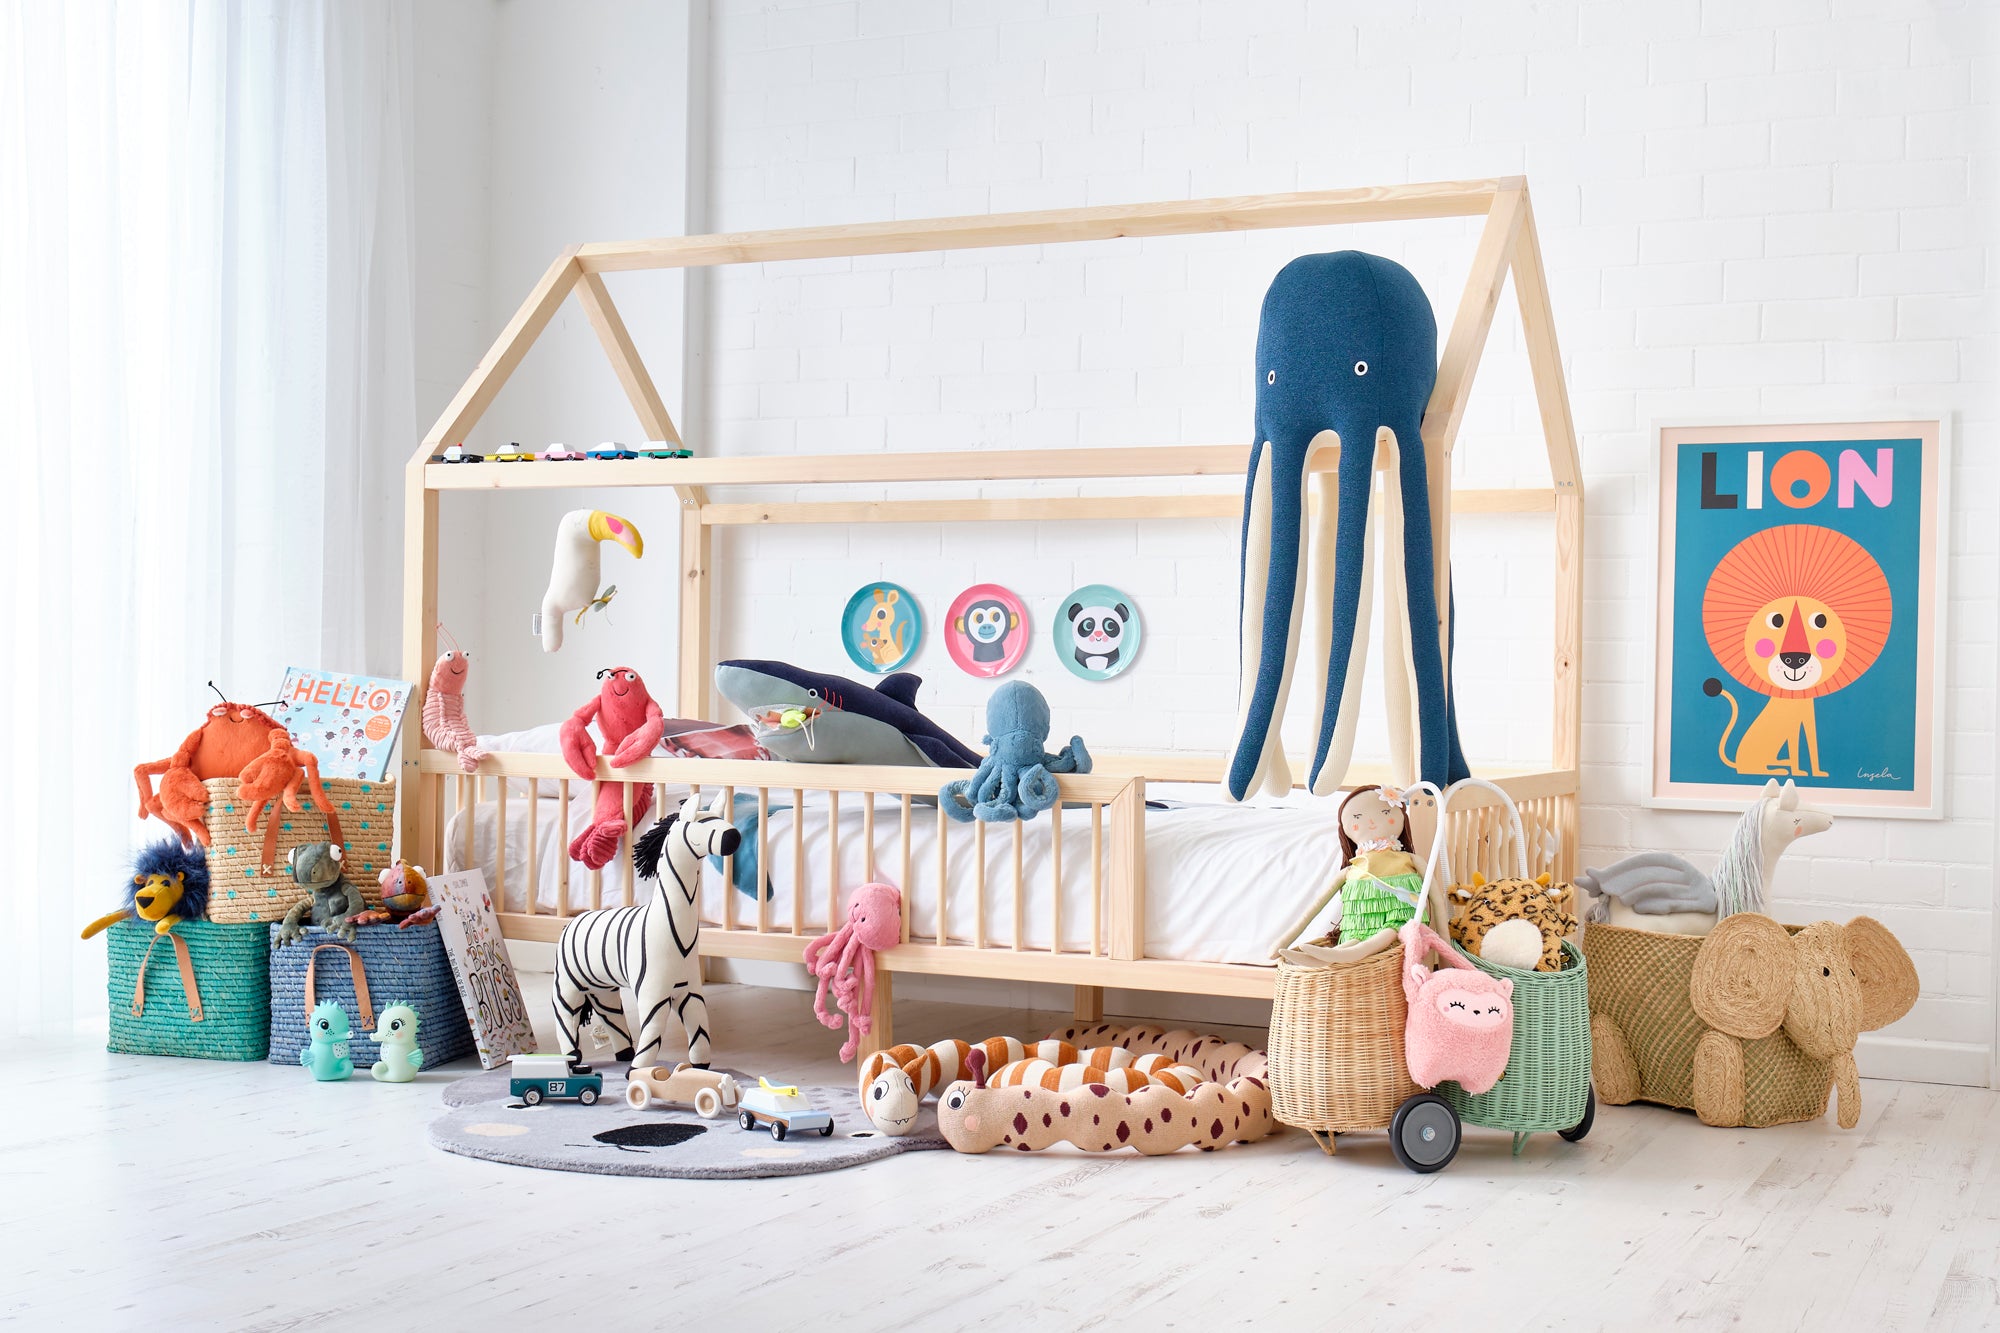 ‘Treasure Island’ Children’s Bedroom, Toys and Accessories, styled by Bobby Rabbit.